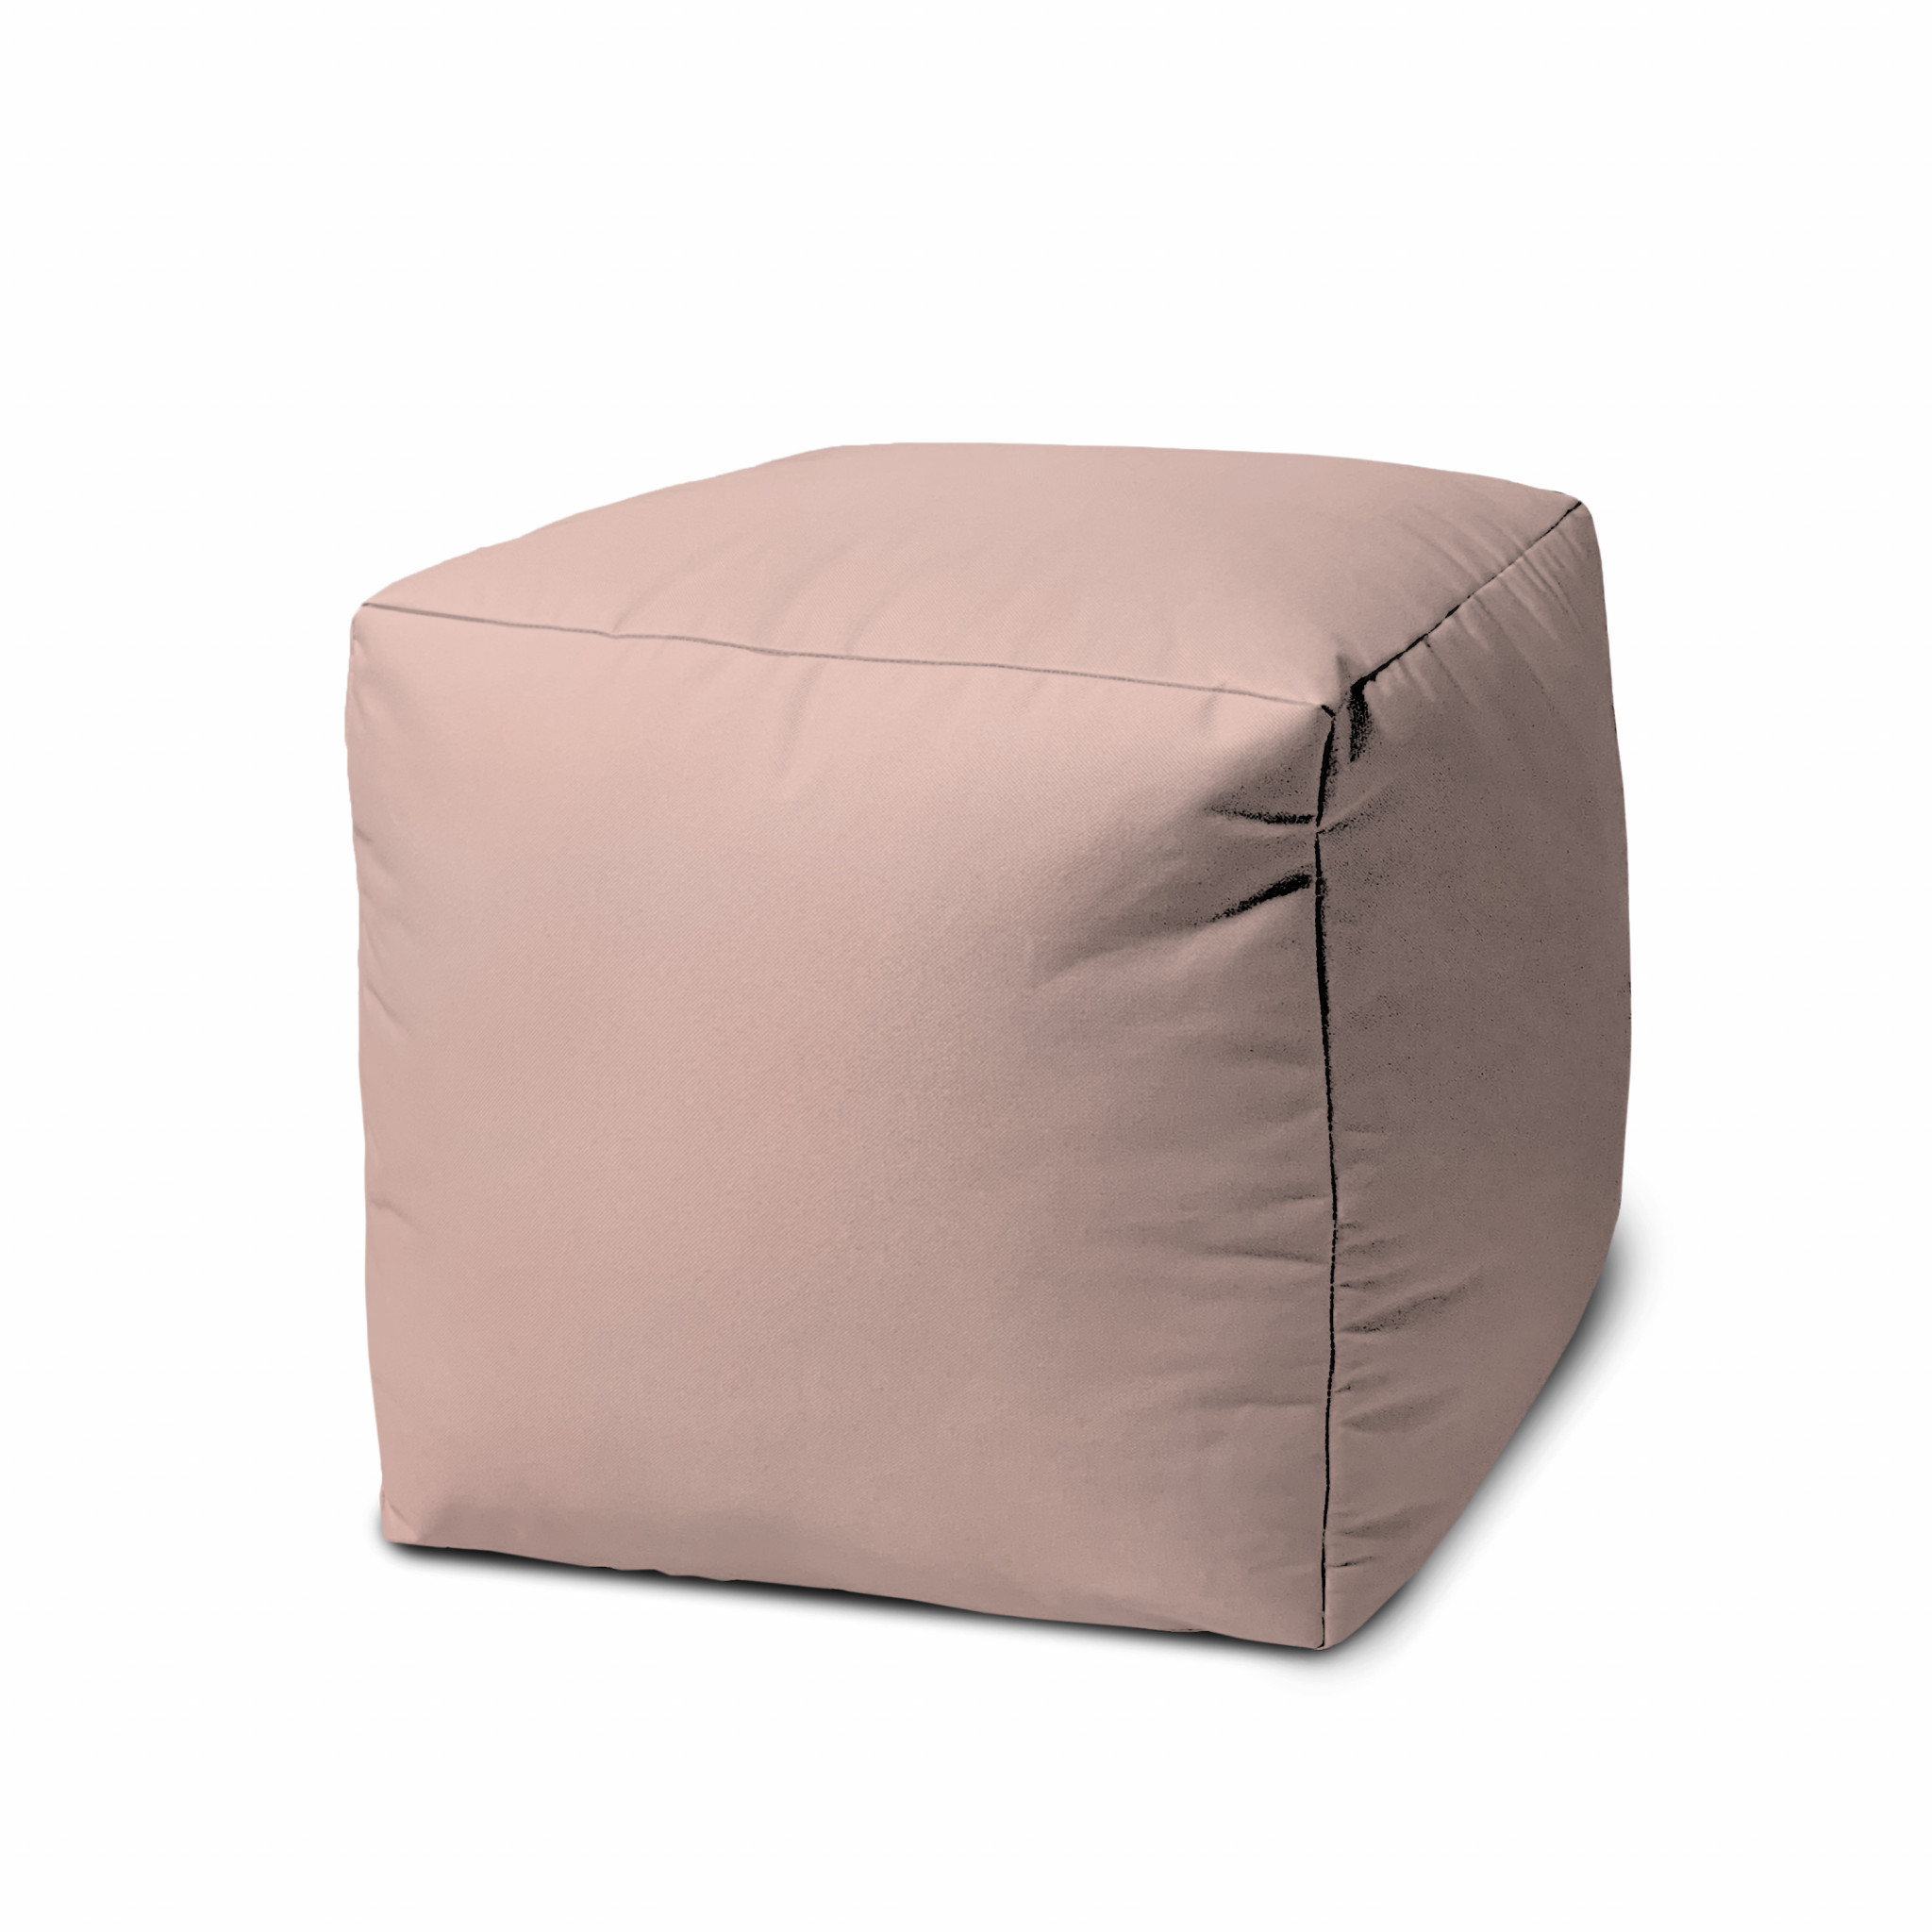 17 Cool Pale Pink Blush Solid Color Indoor Outdoor Pouf Ottoman